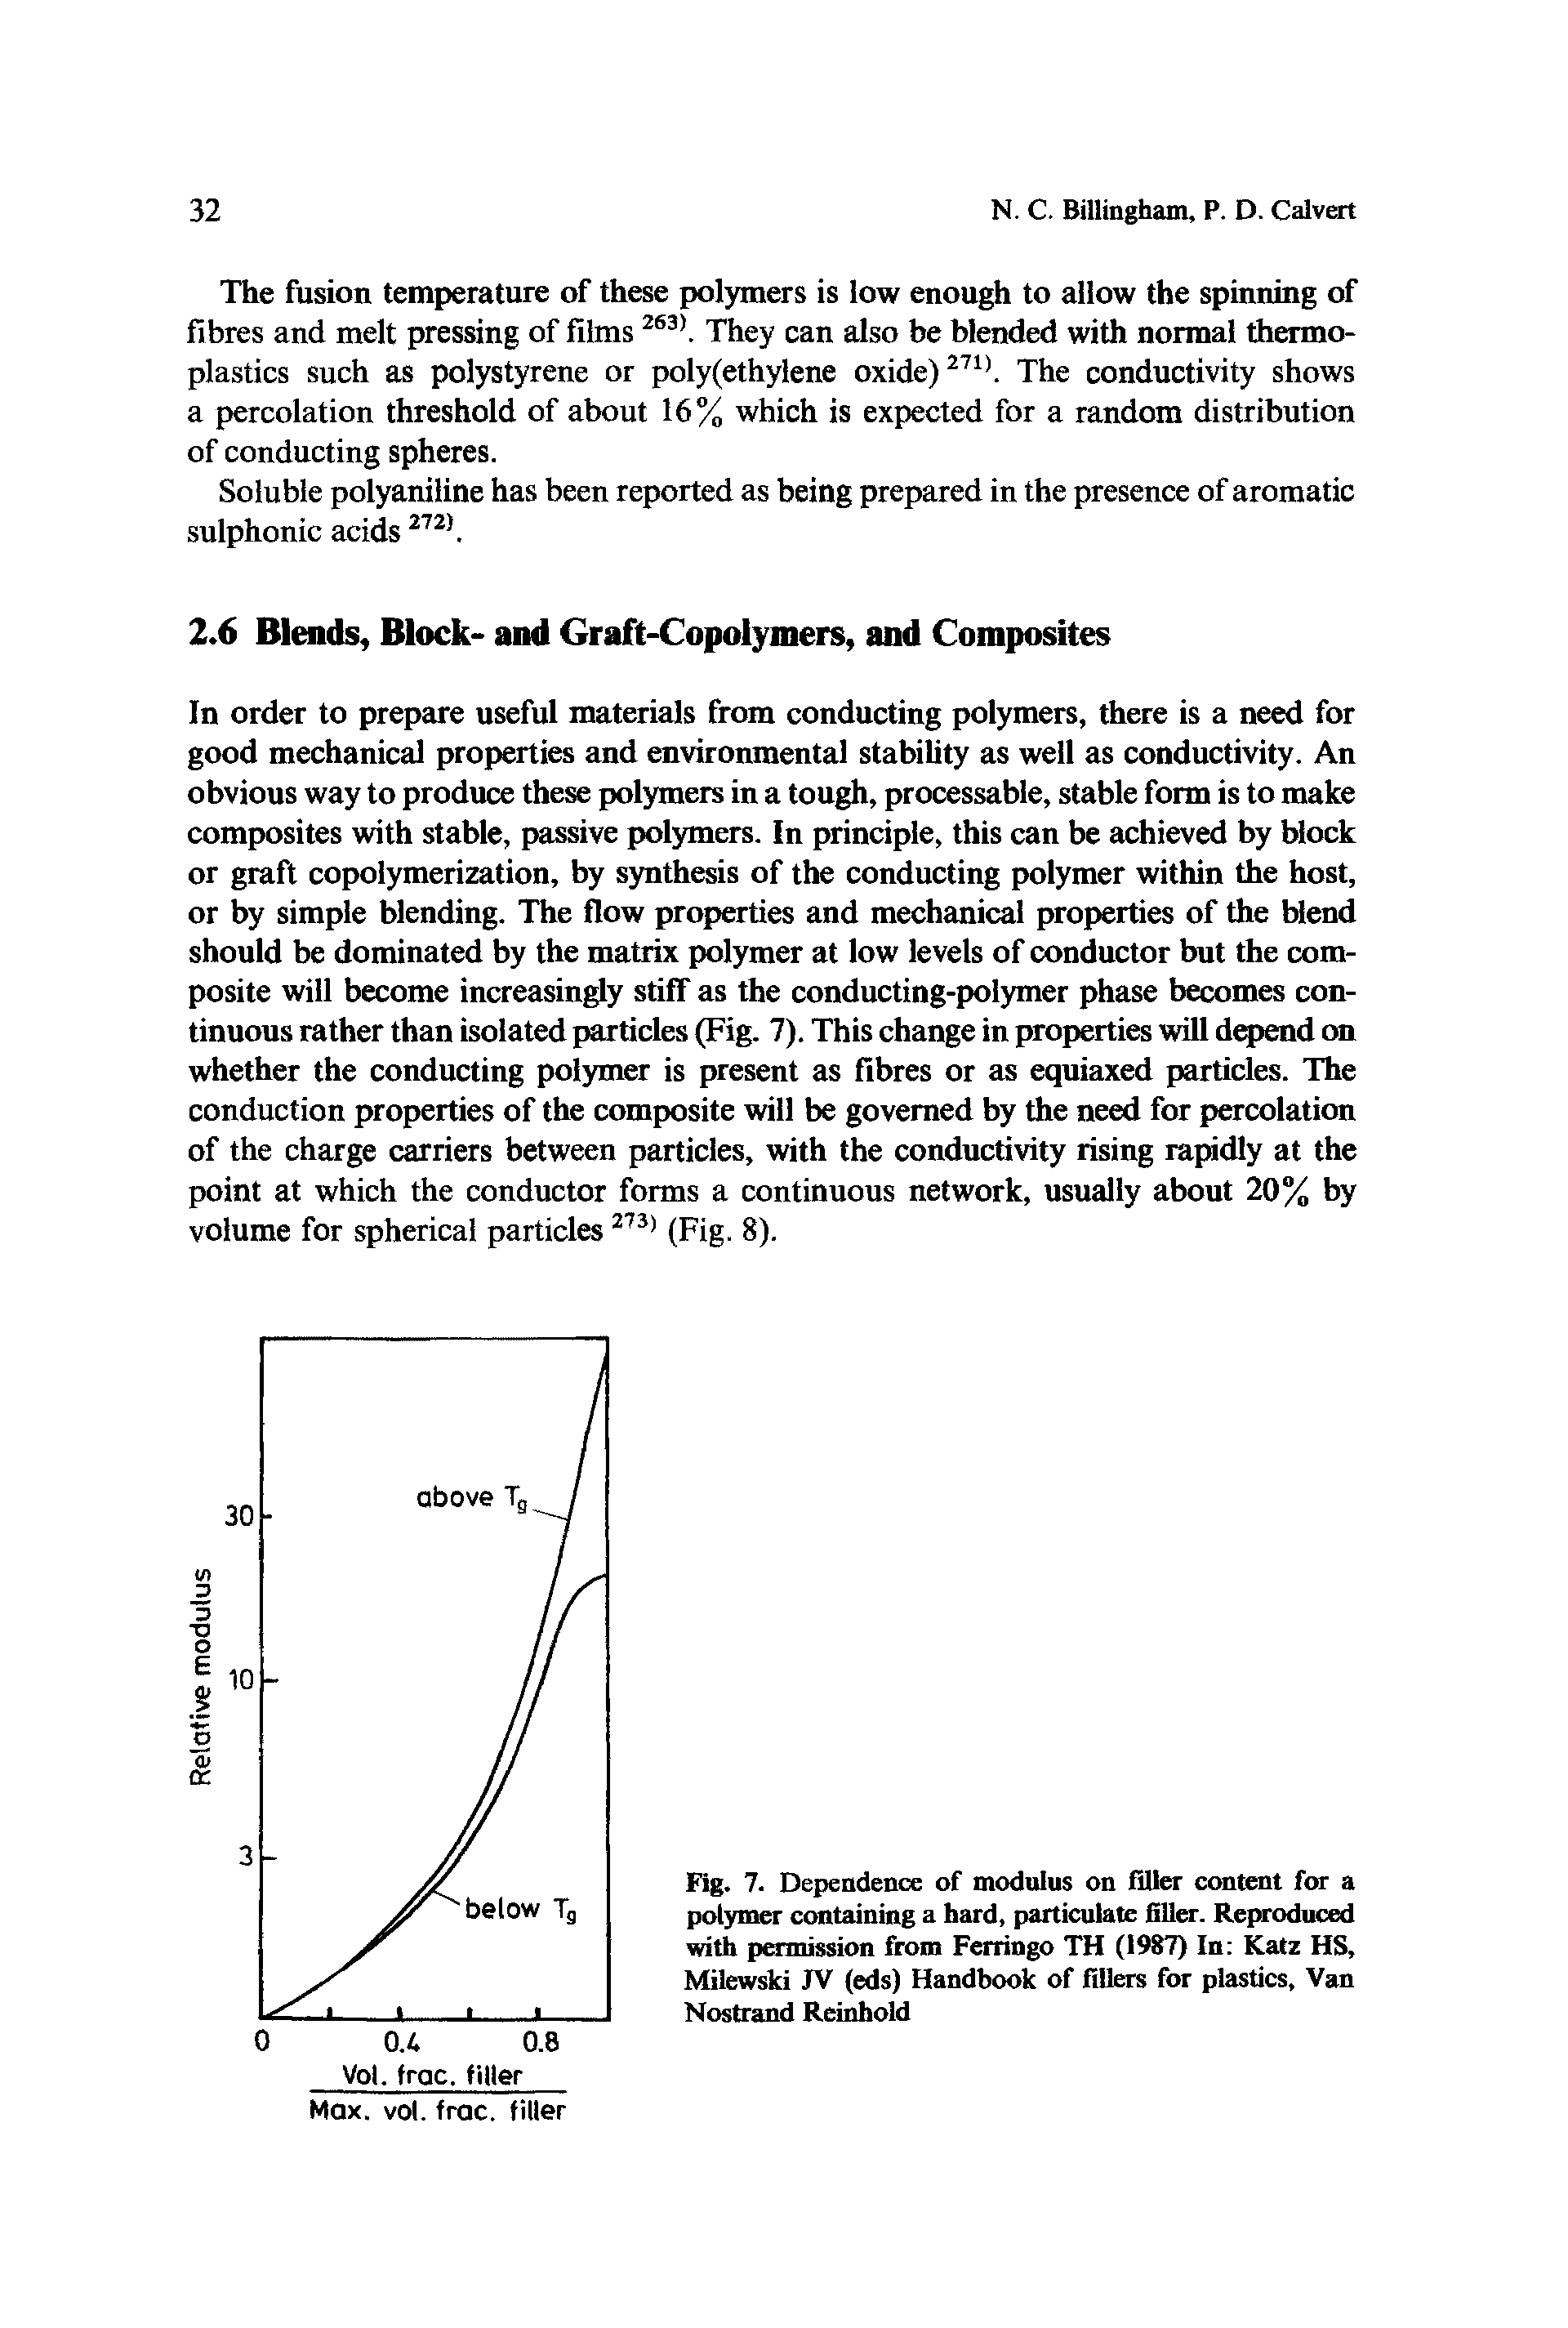 Fig. 7. Dependence of modulus on filler content for a polymer containing a hard, particulate filler. Reproduced with permission from Ferringo TH (1987) In Katz HS, Milewski JV (eds) Handbook of fillers for plastics, Van Nostrand Reinhold...